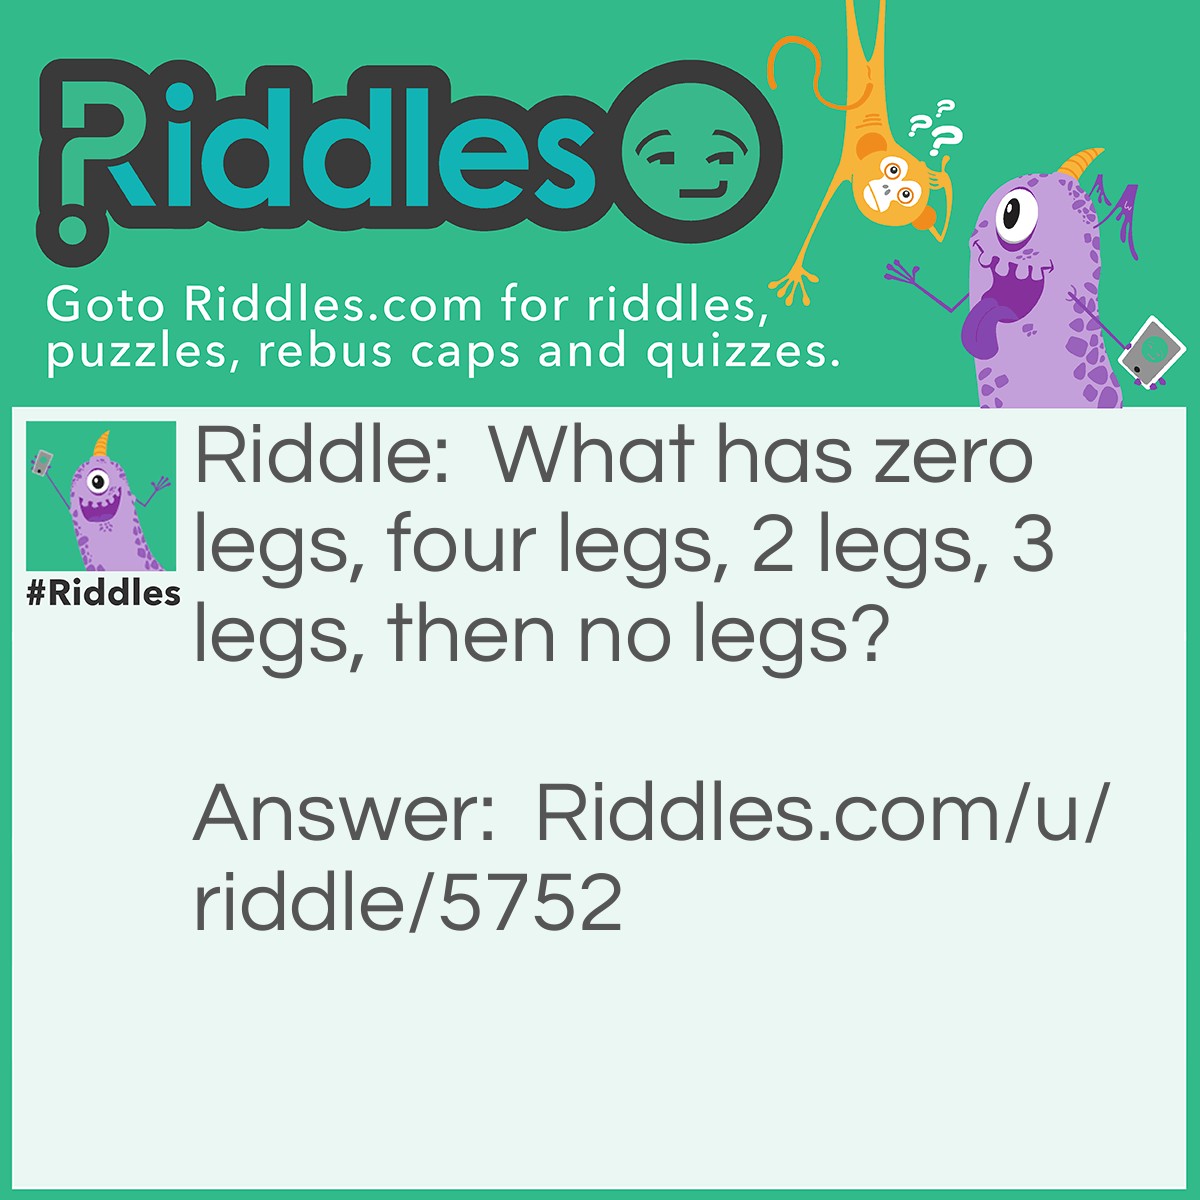 Riddle: What has zero legs, four legs, 2 legs, 3 legs, then no legs? Answer: A human you aren’t born yet so no legs the you crawl like a dog or something then you get old and use a cane then you die, therefore you have no legs